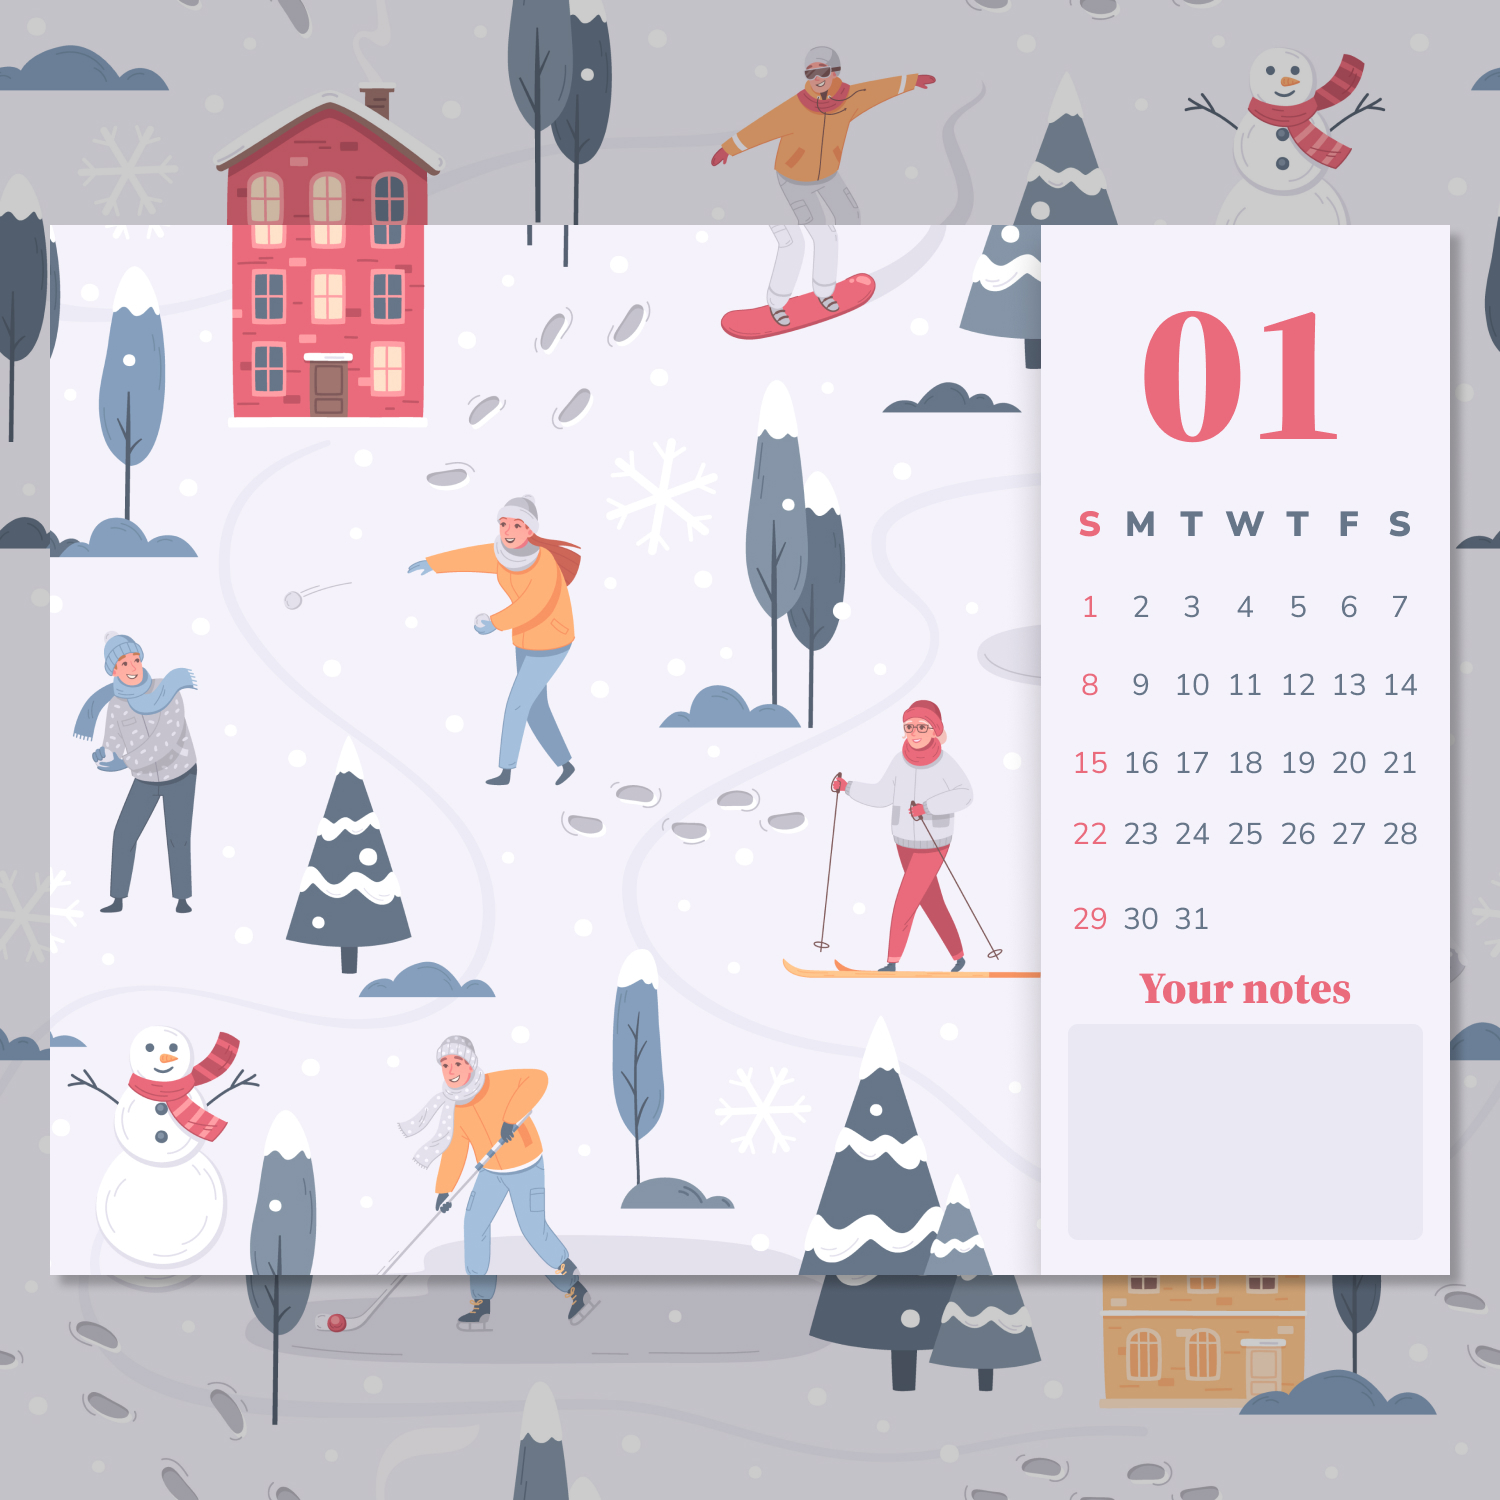 Free Colorful January Calendar cover.